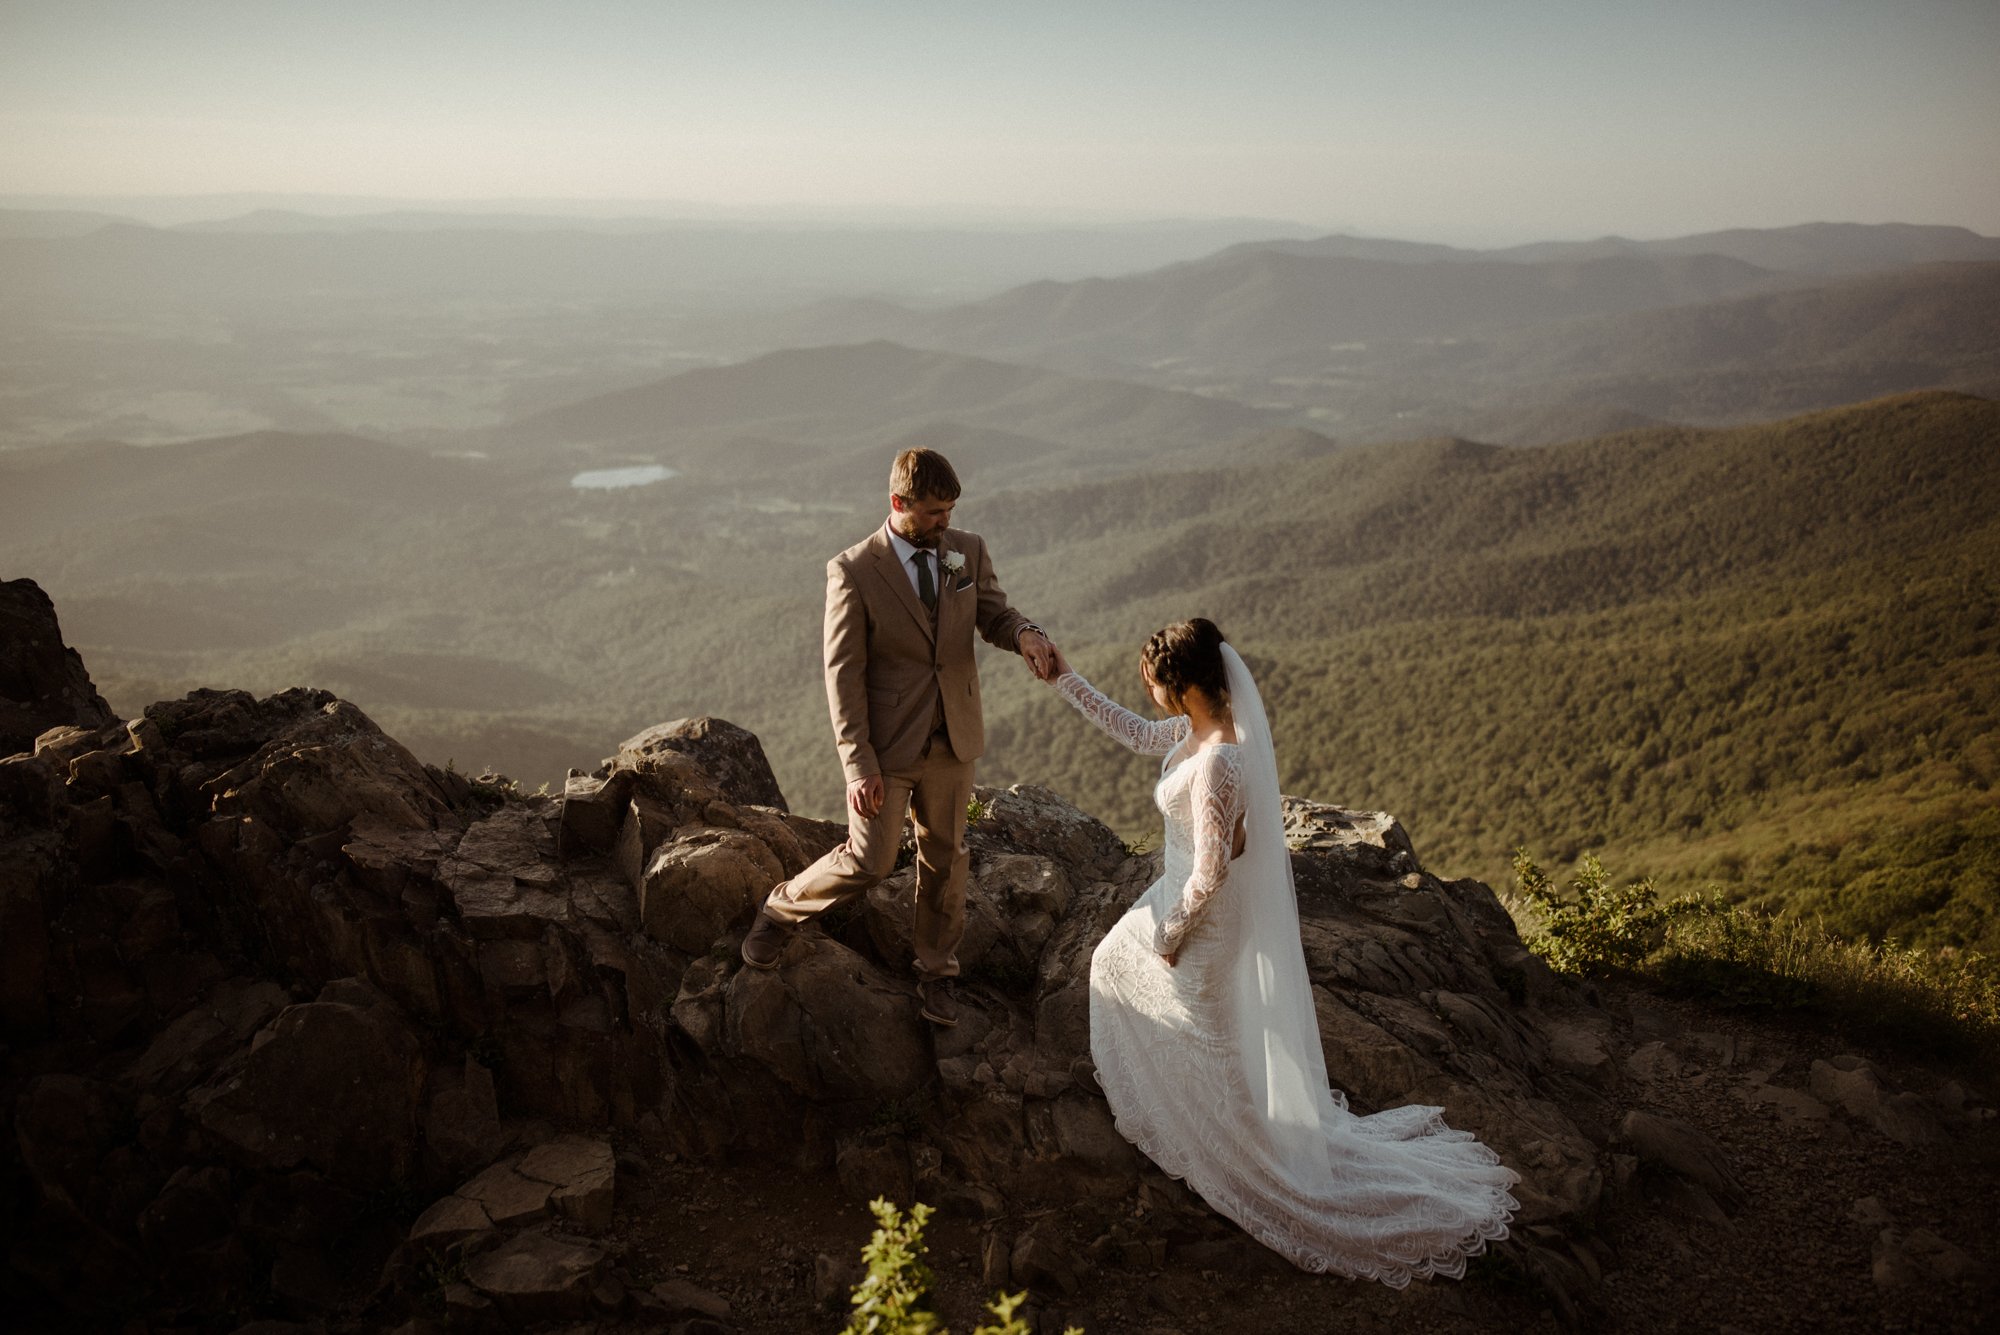 Sunset Elopement on Stony Man Summit in Shenandoah National Park - White Sails Creative Elopement Photography - July Elopement on the Blue Ridge Parkway_55.jpg